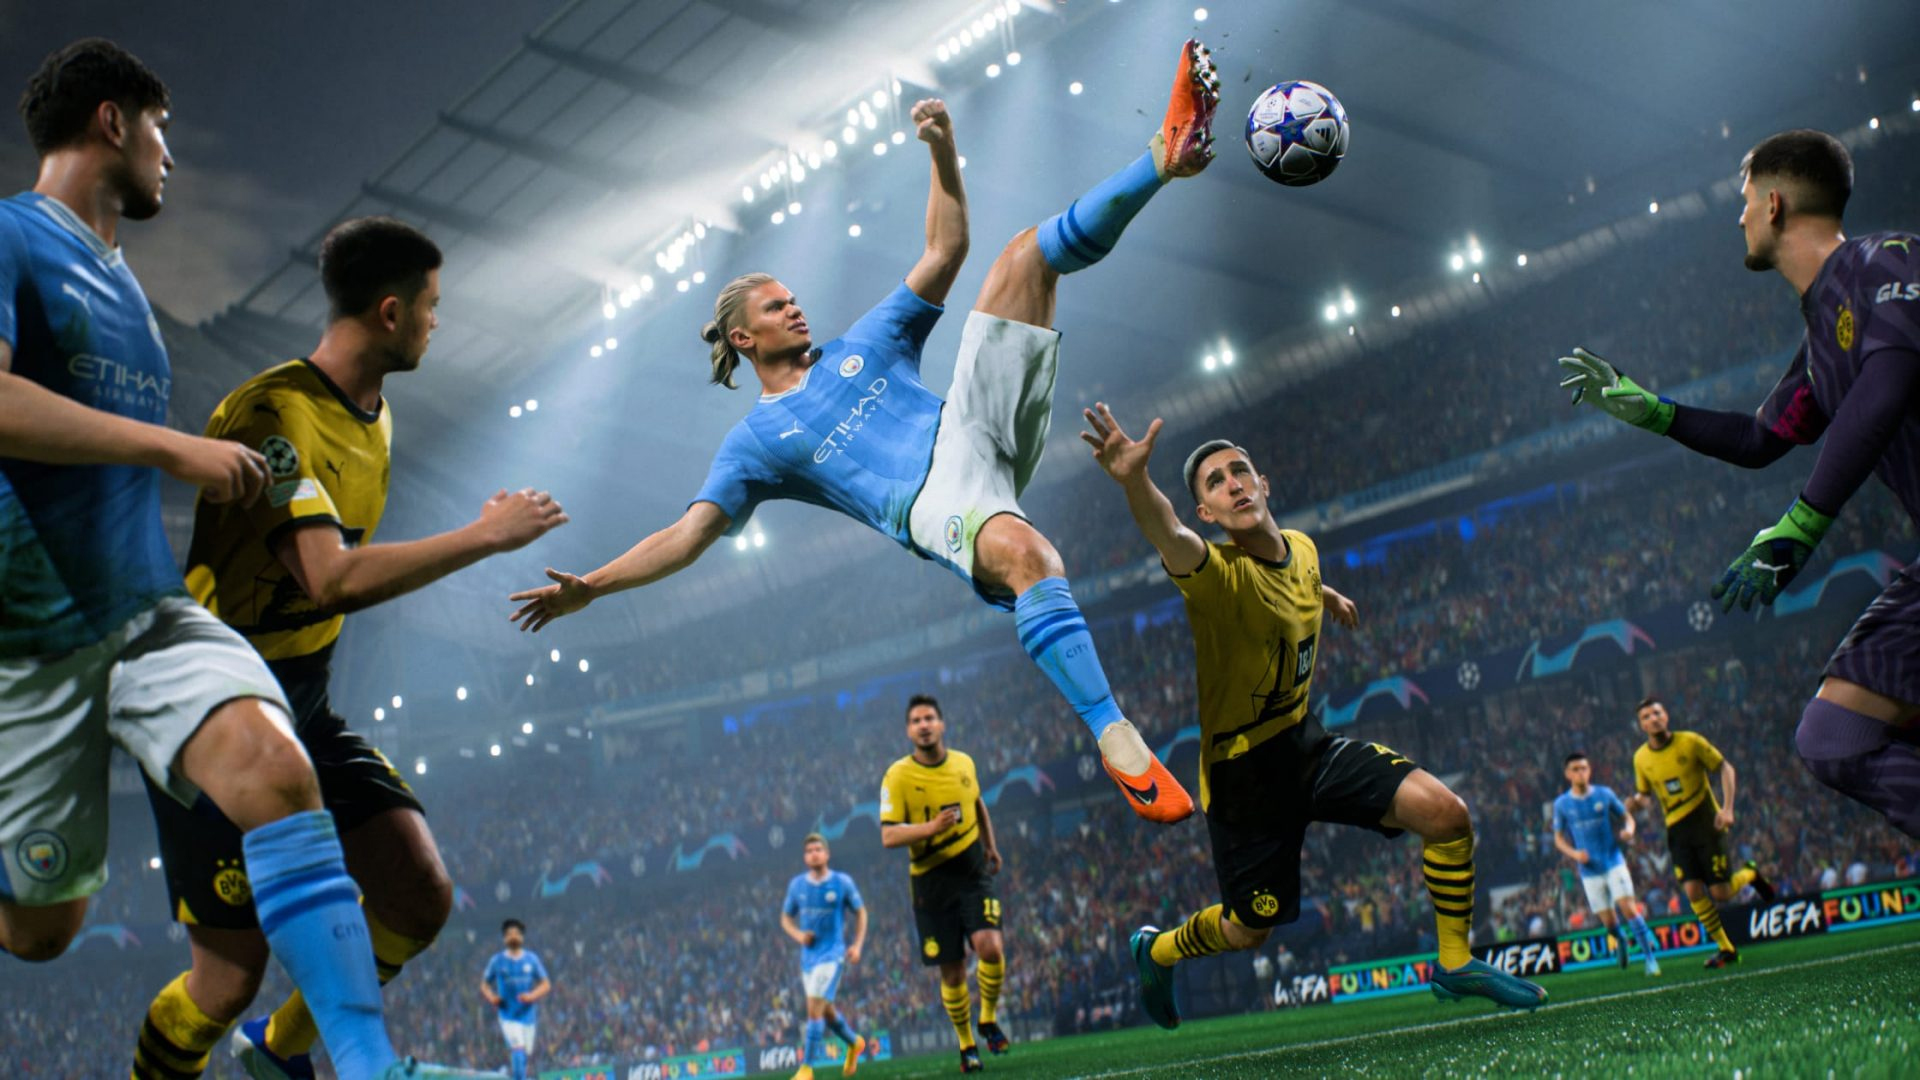 EA pulls its FIFA games from digital storefronts such as Steam